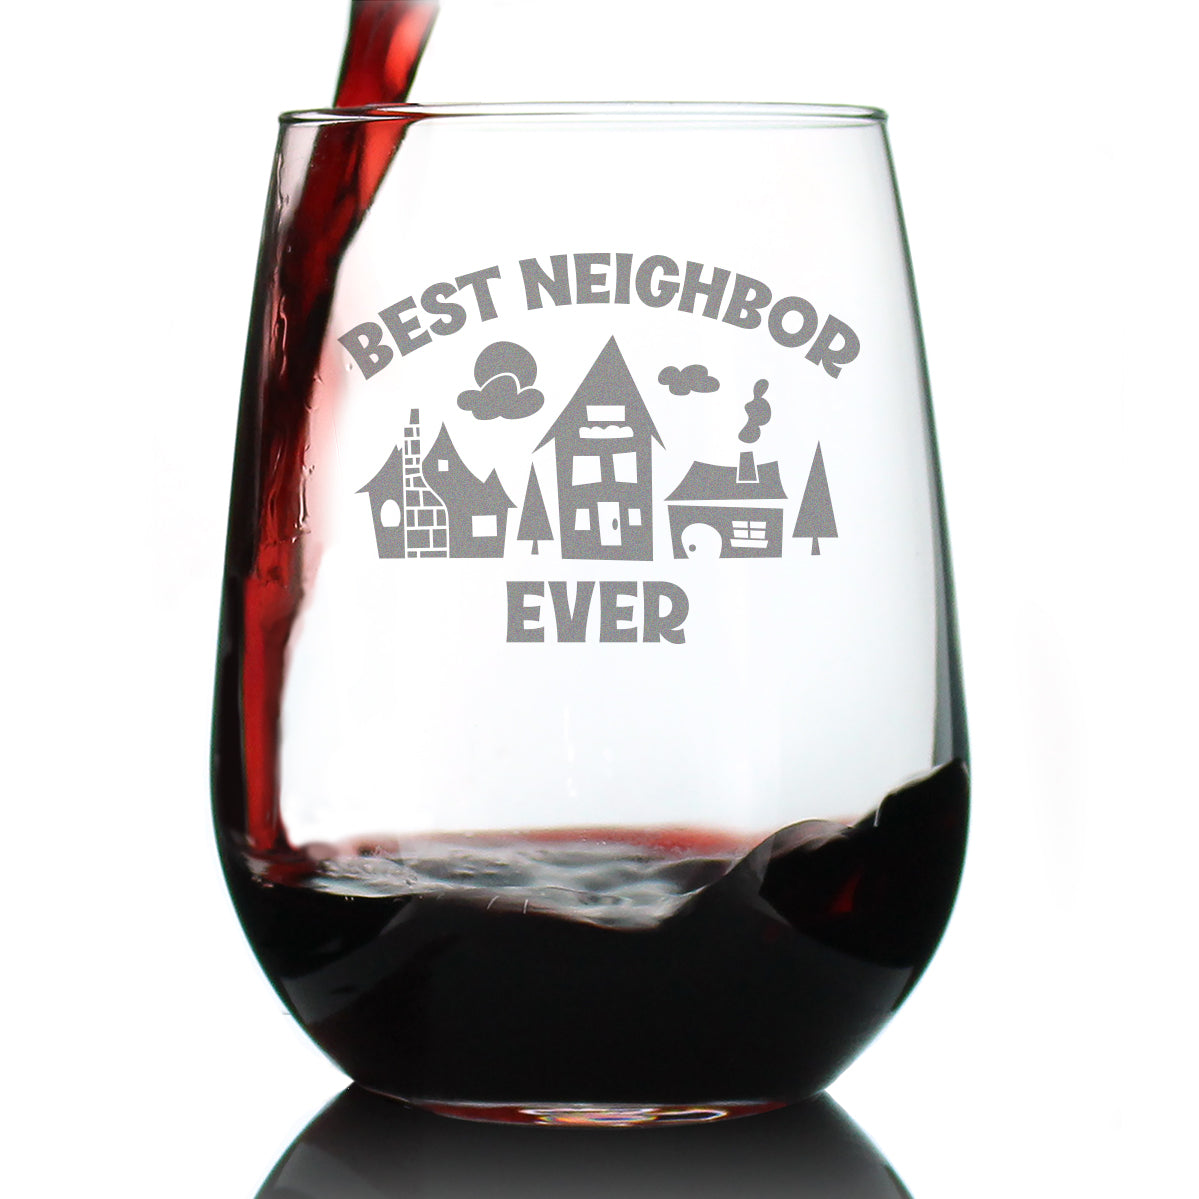 Best Neighbor Ever - Funny Stemless Wine Glass, Large 17 Ounce Size, Etched Sayings, Moving Gift